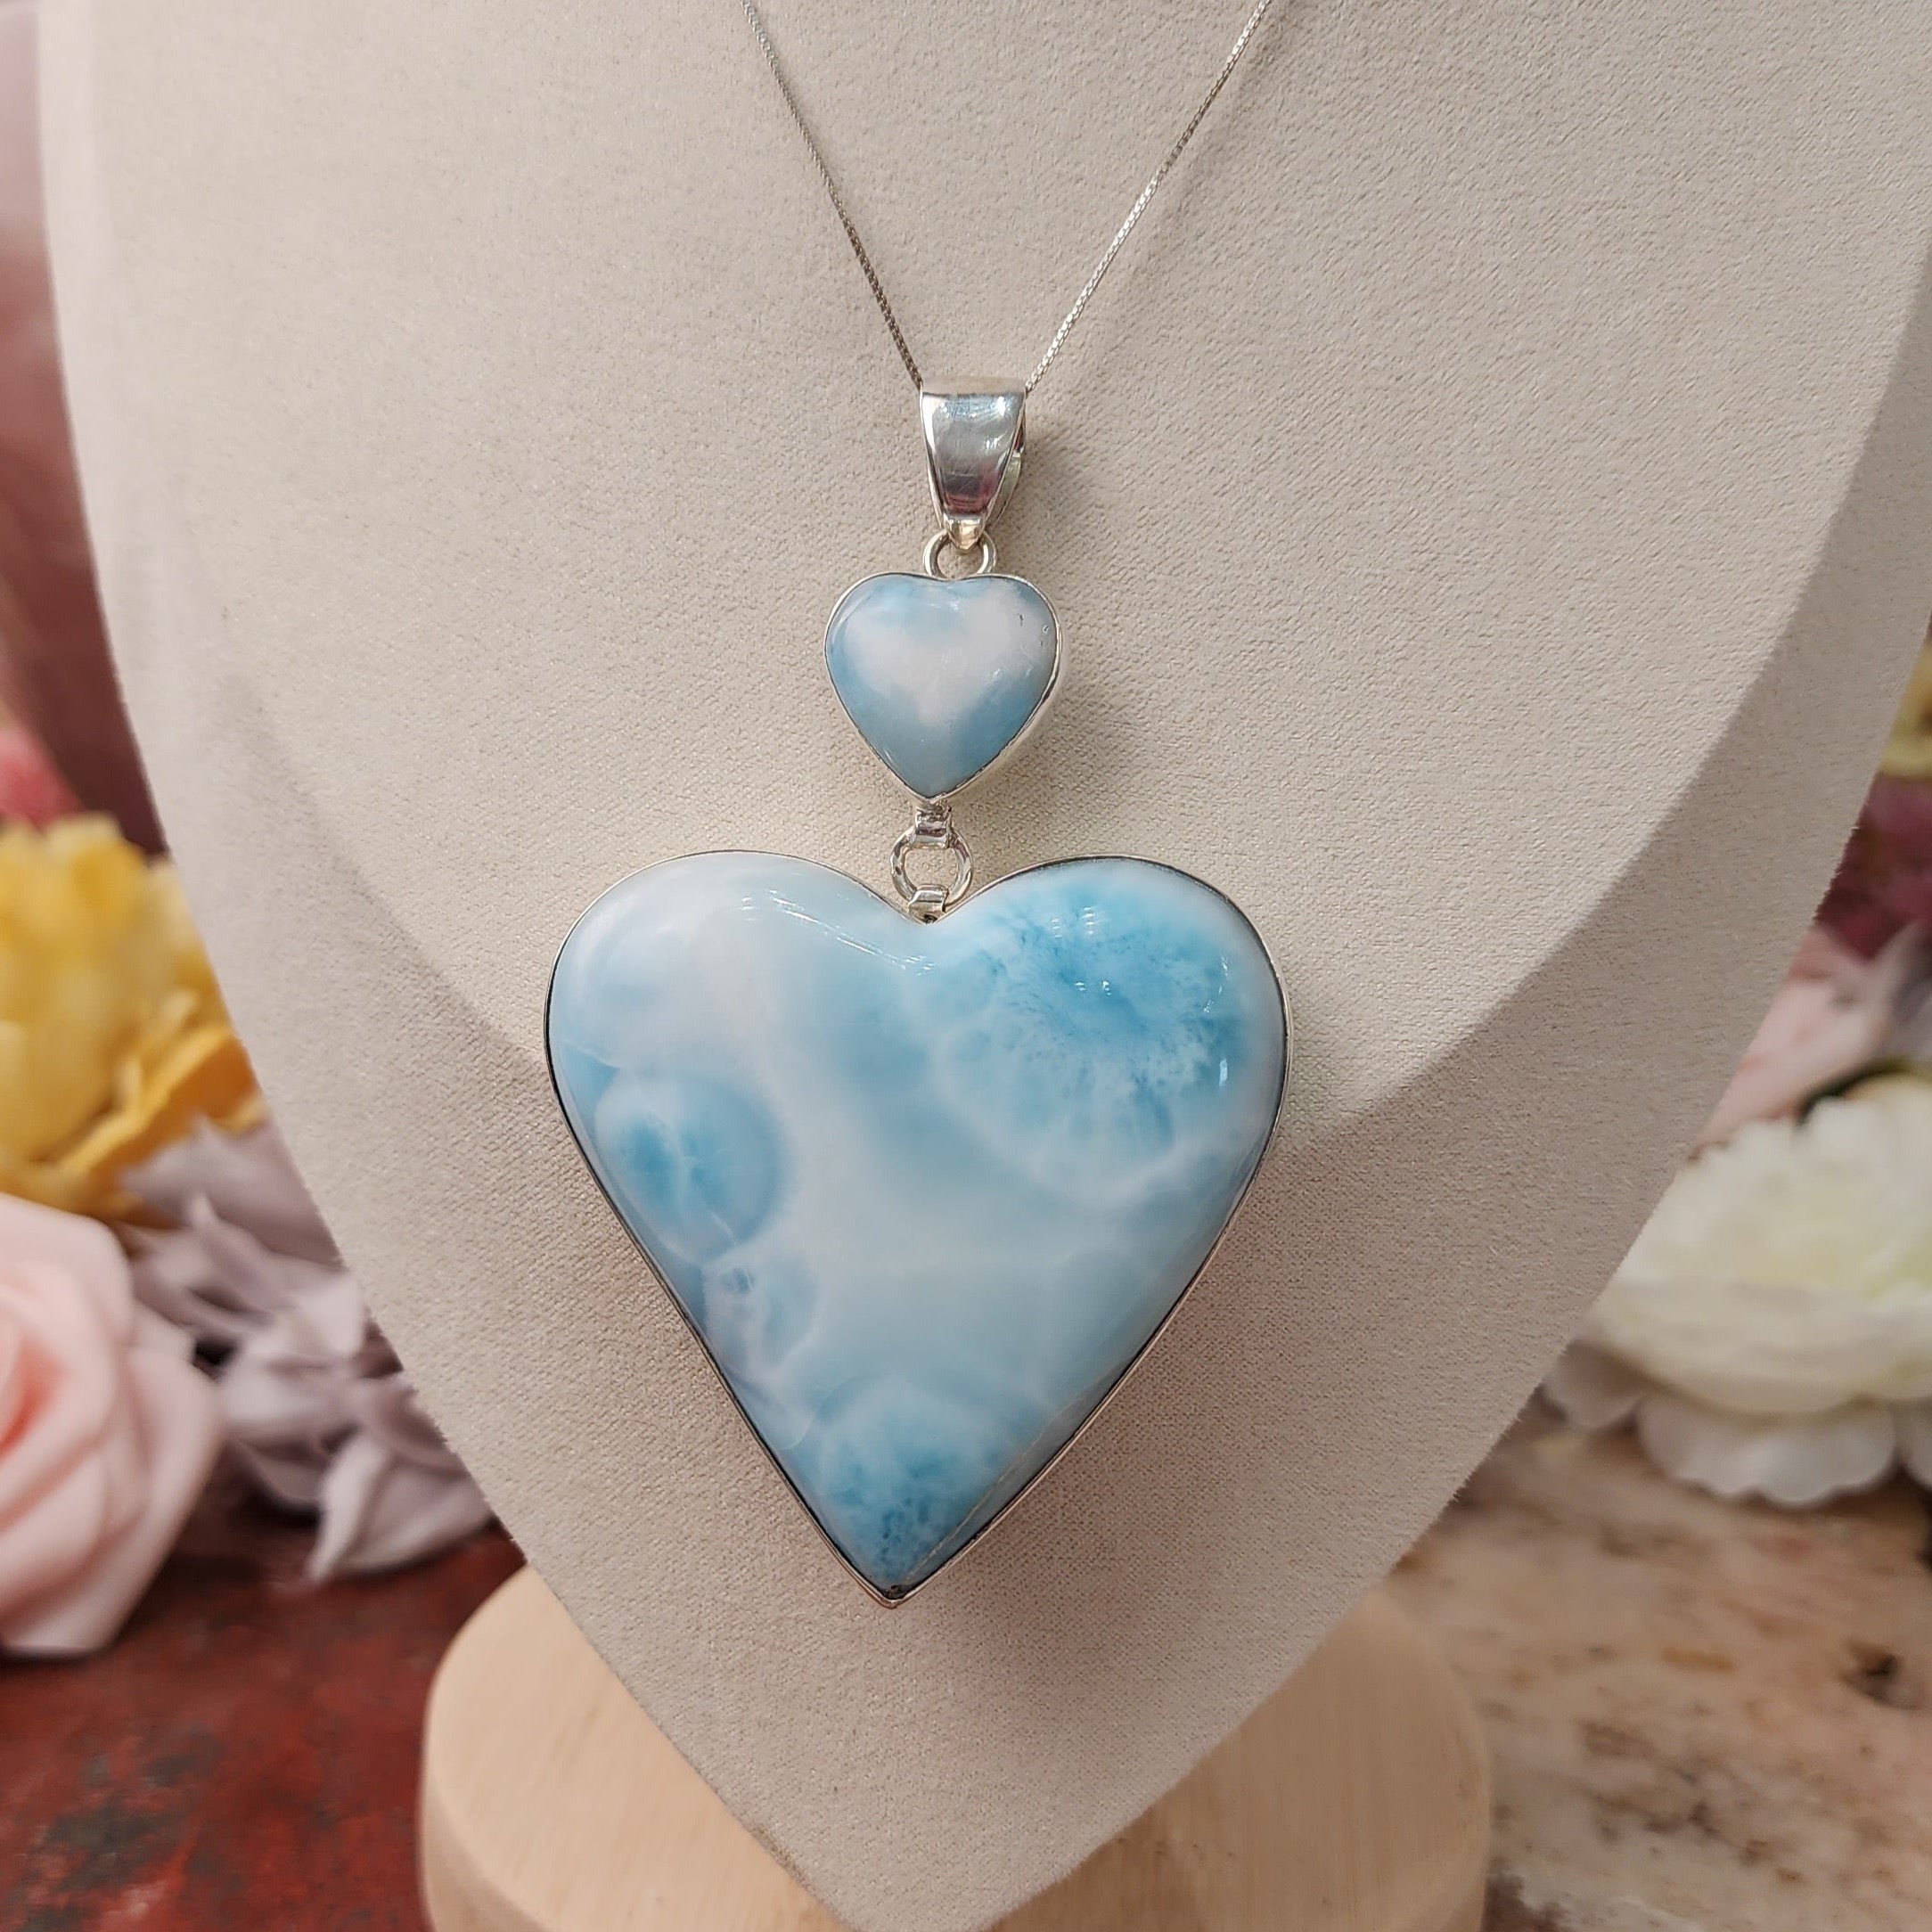 Larimar Heart Statement Necklace .925 Silver for Peace and Tranquility